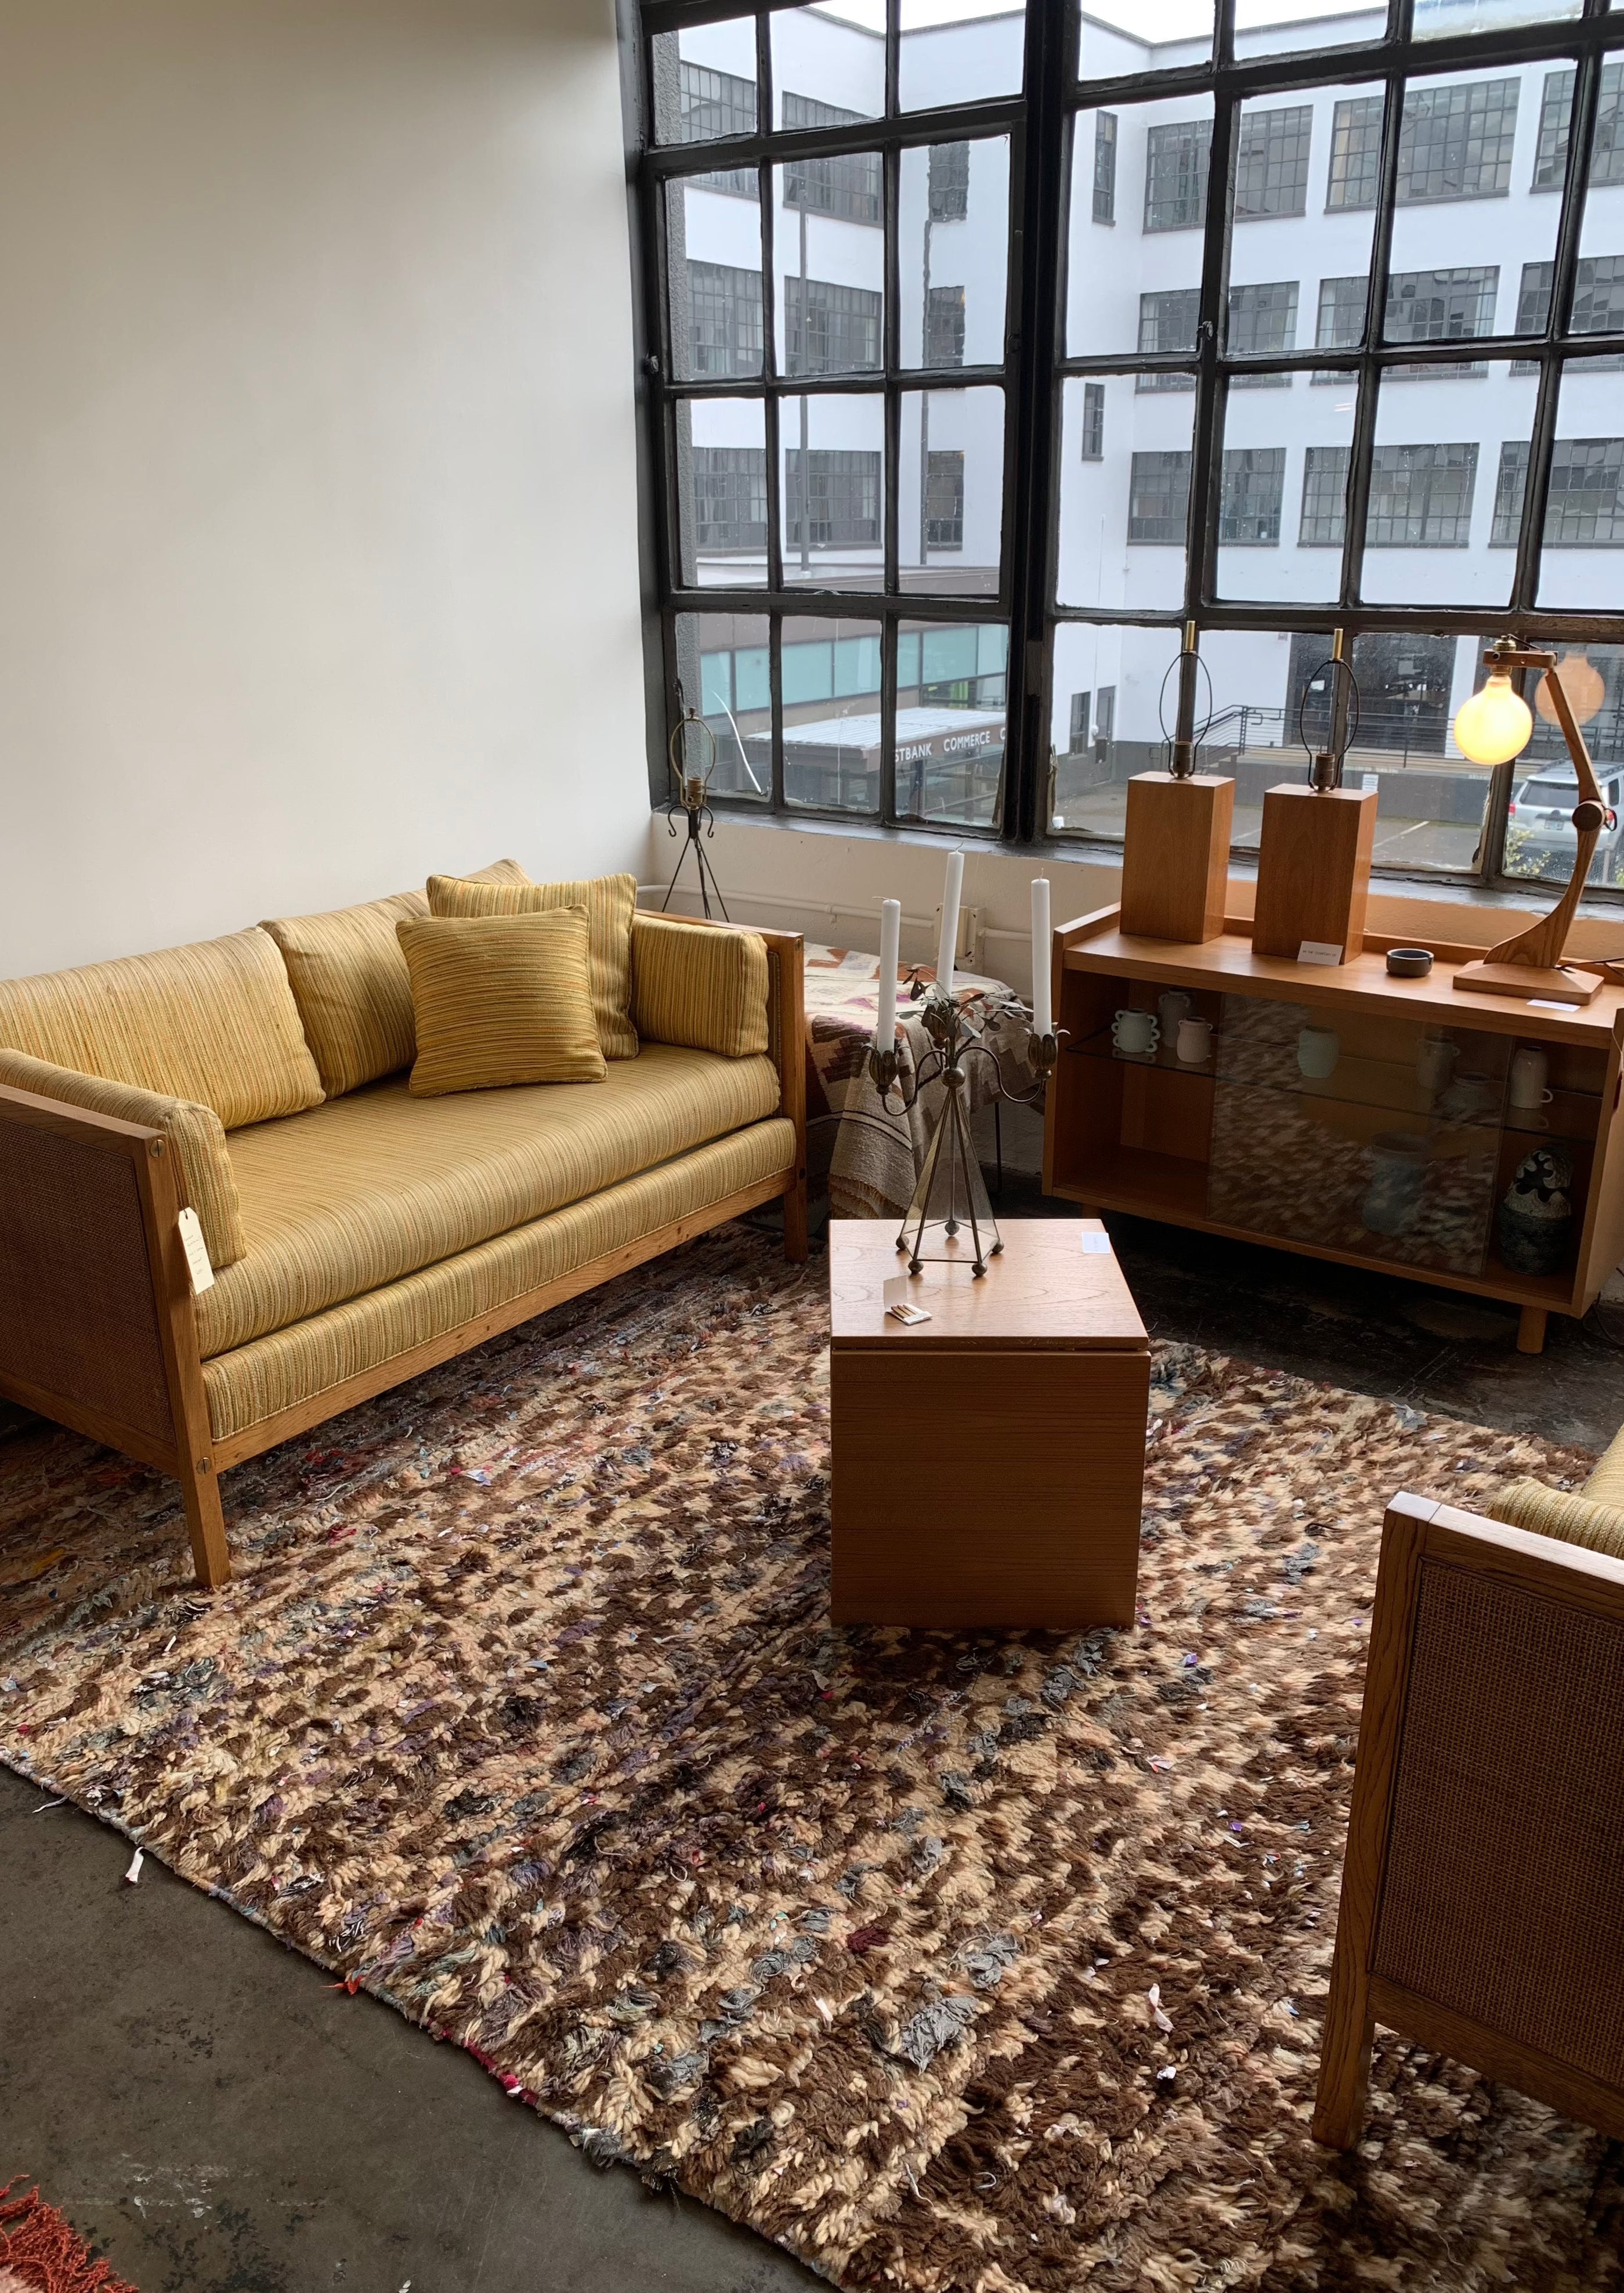 moroccan checkered rug in mcm stylish loft apartment with yellow sofa and wood furniture 